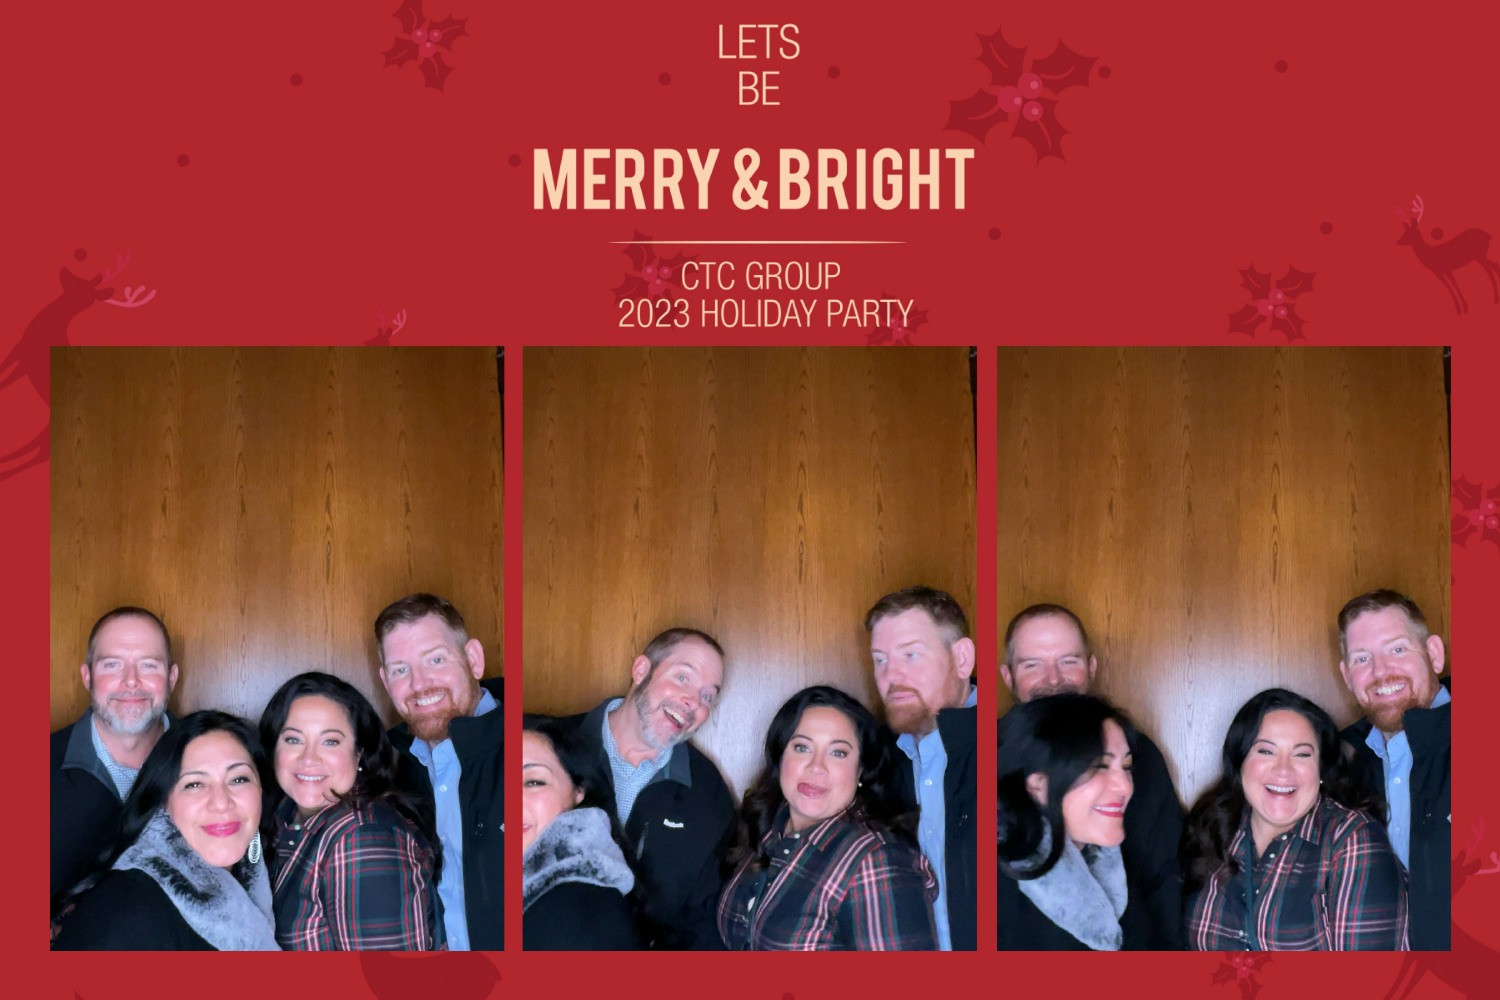 Fun with the holiday party photo booth. 